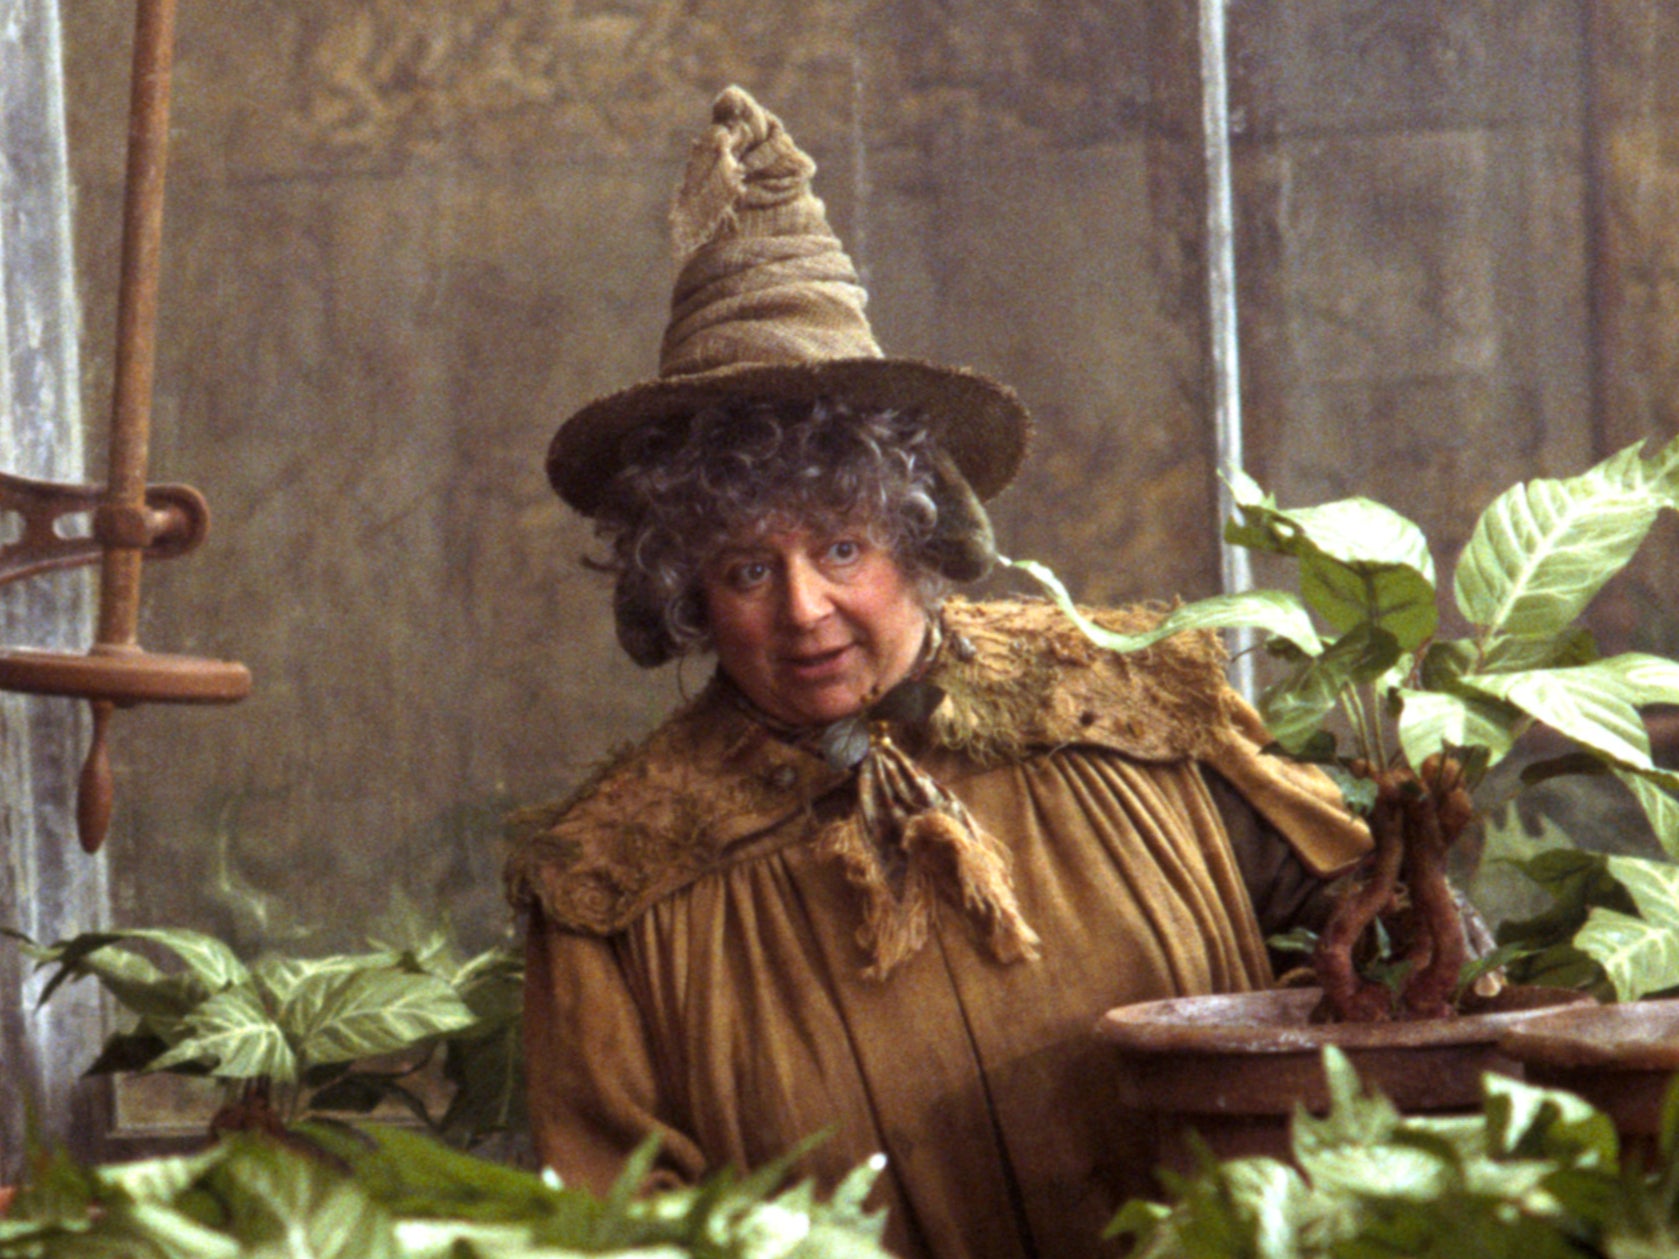 Miriam Margolyes has appeared in the Harry Potter film series